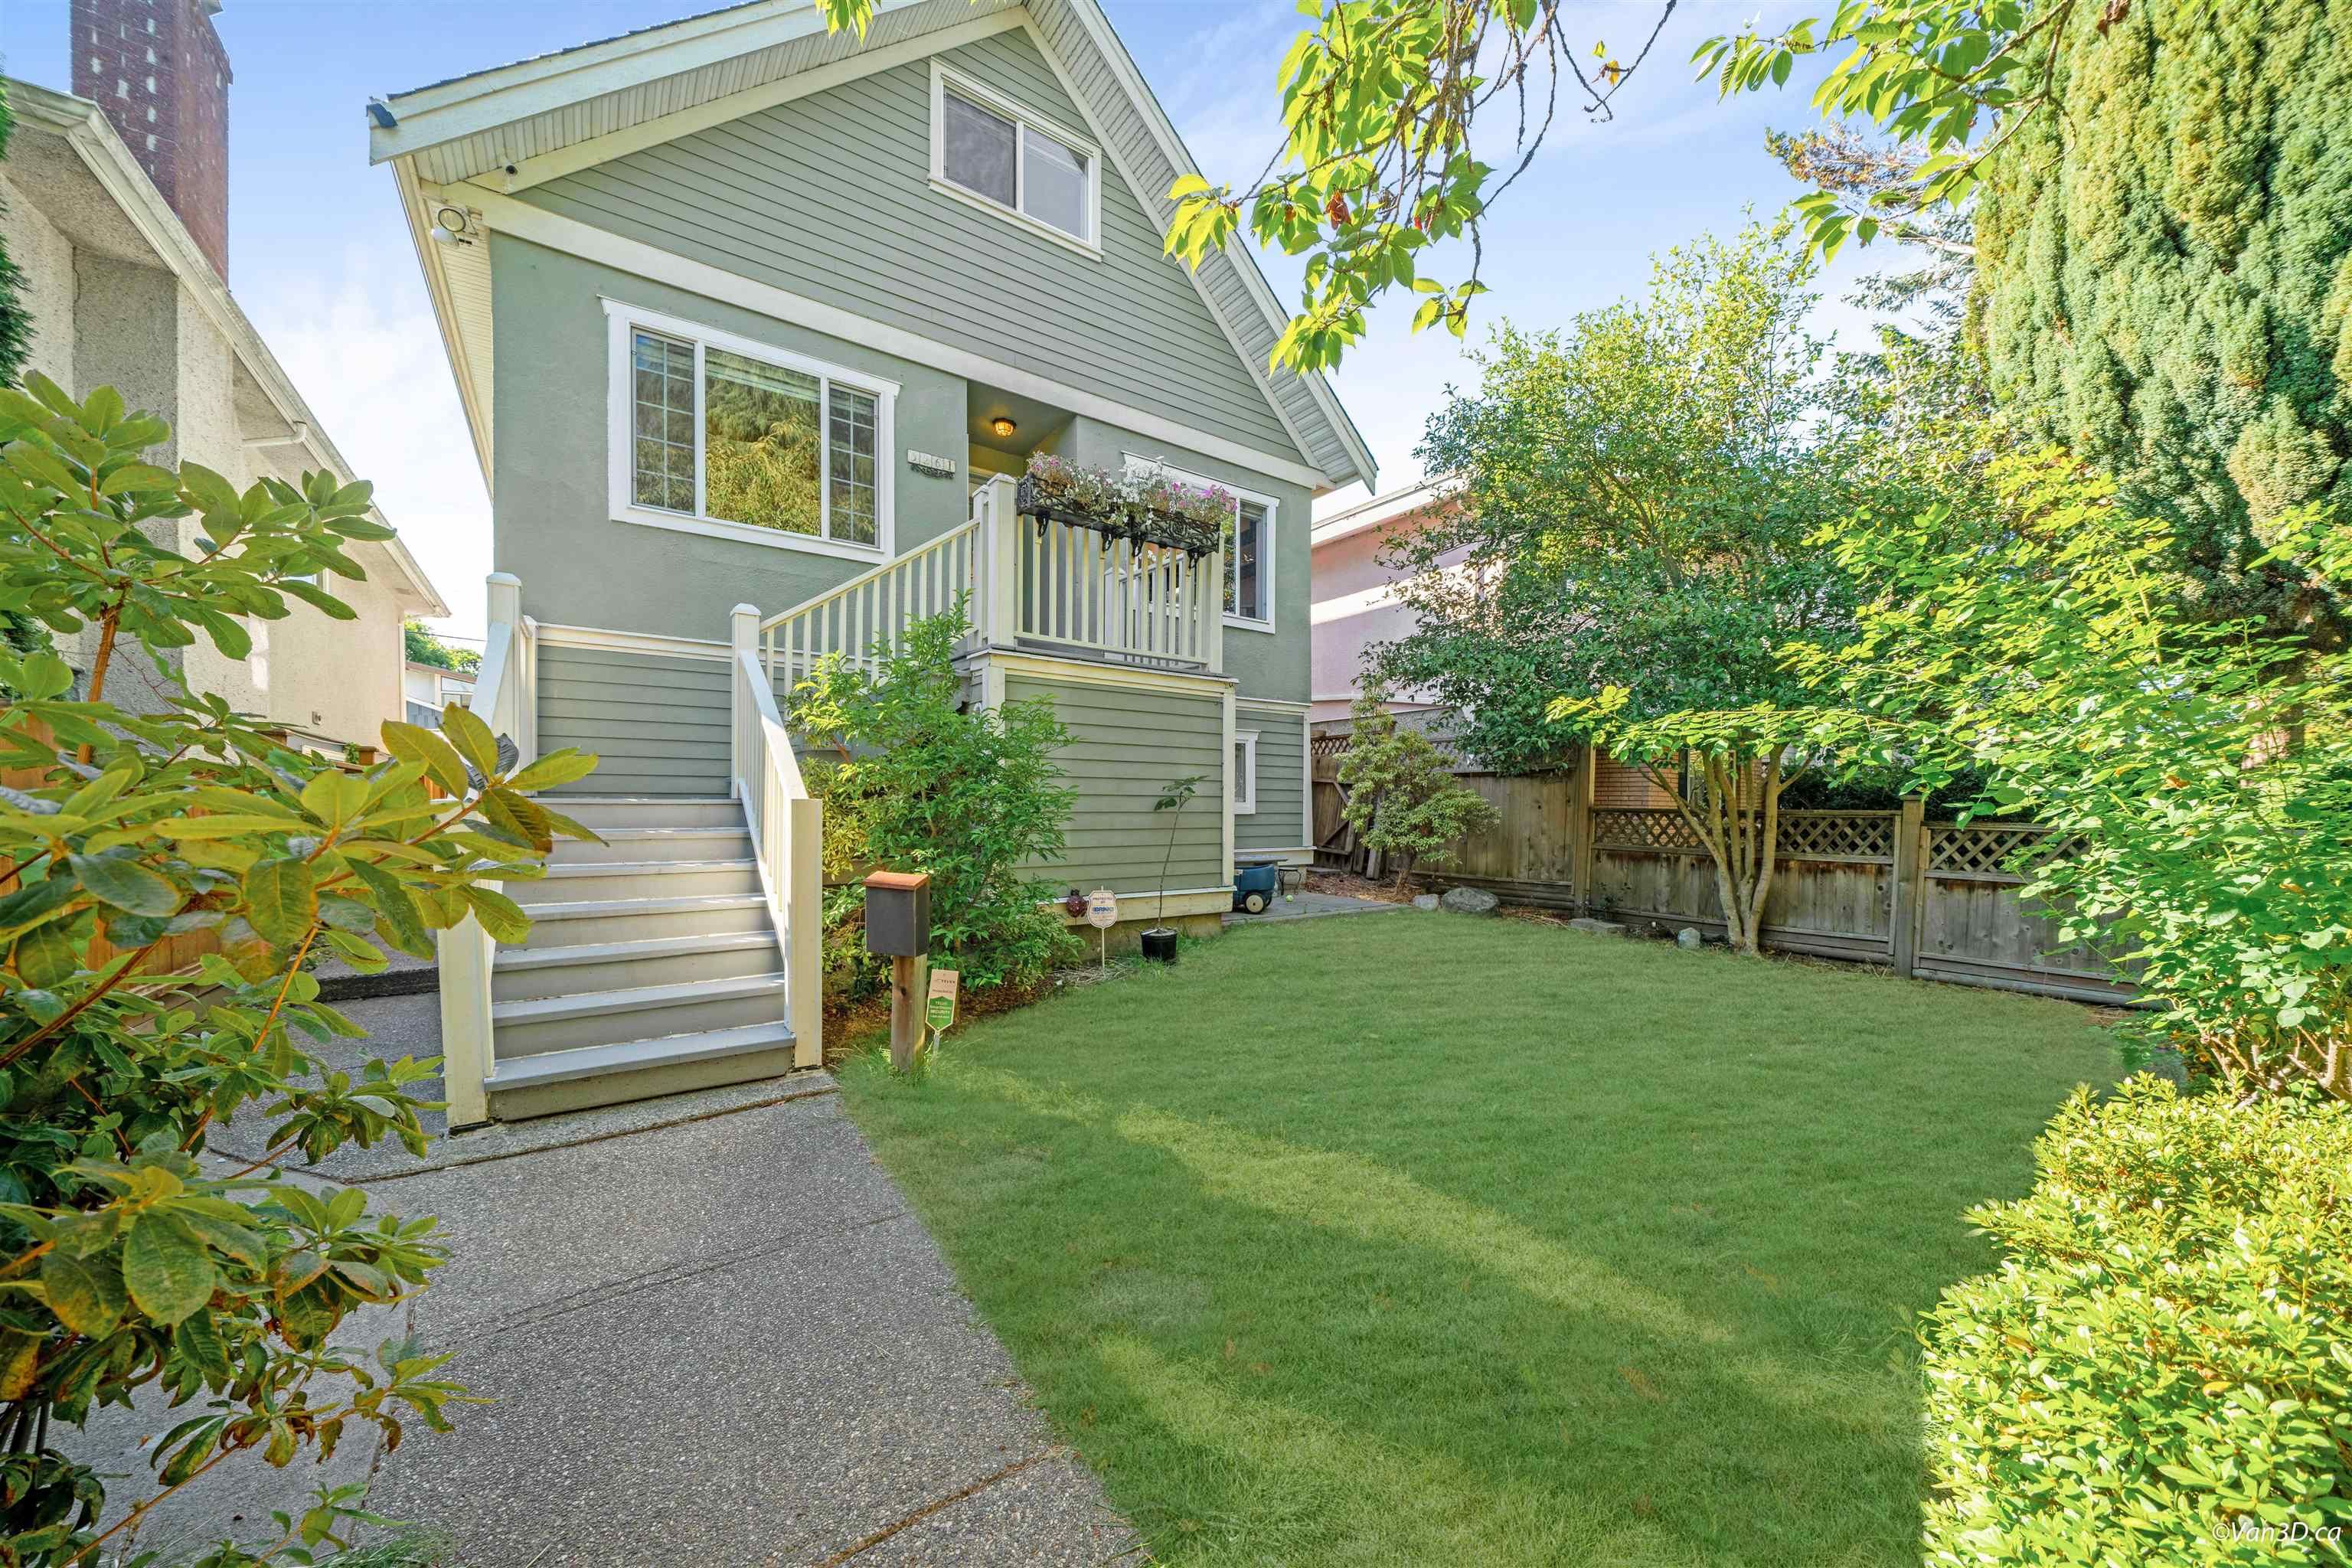 I have sold a property at 5261 PRINCE ALBERT ST in Vancouver
